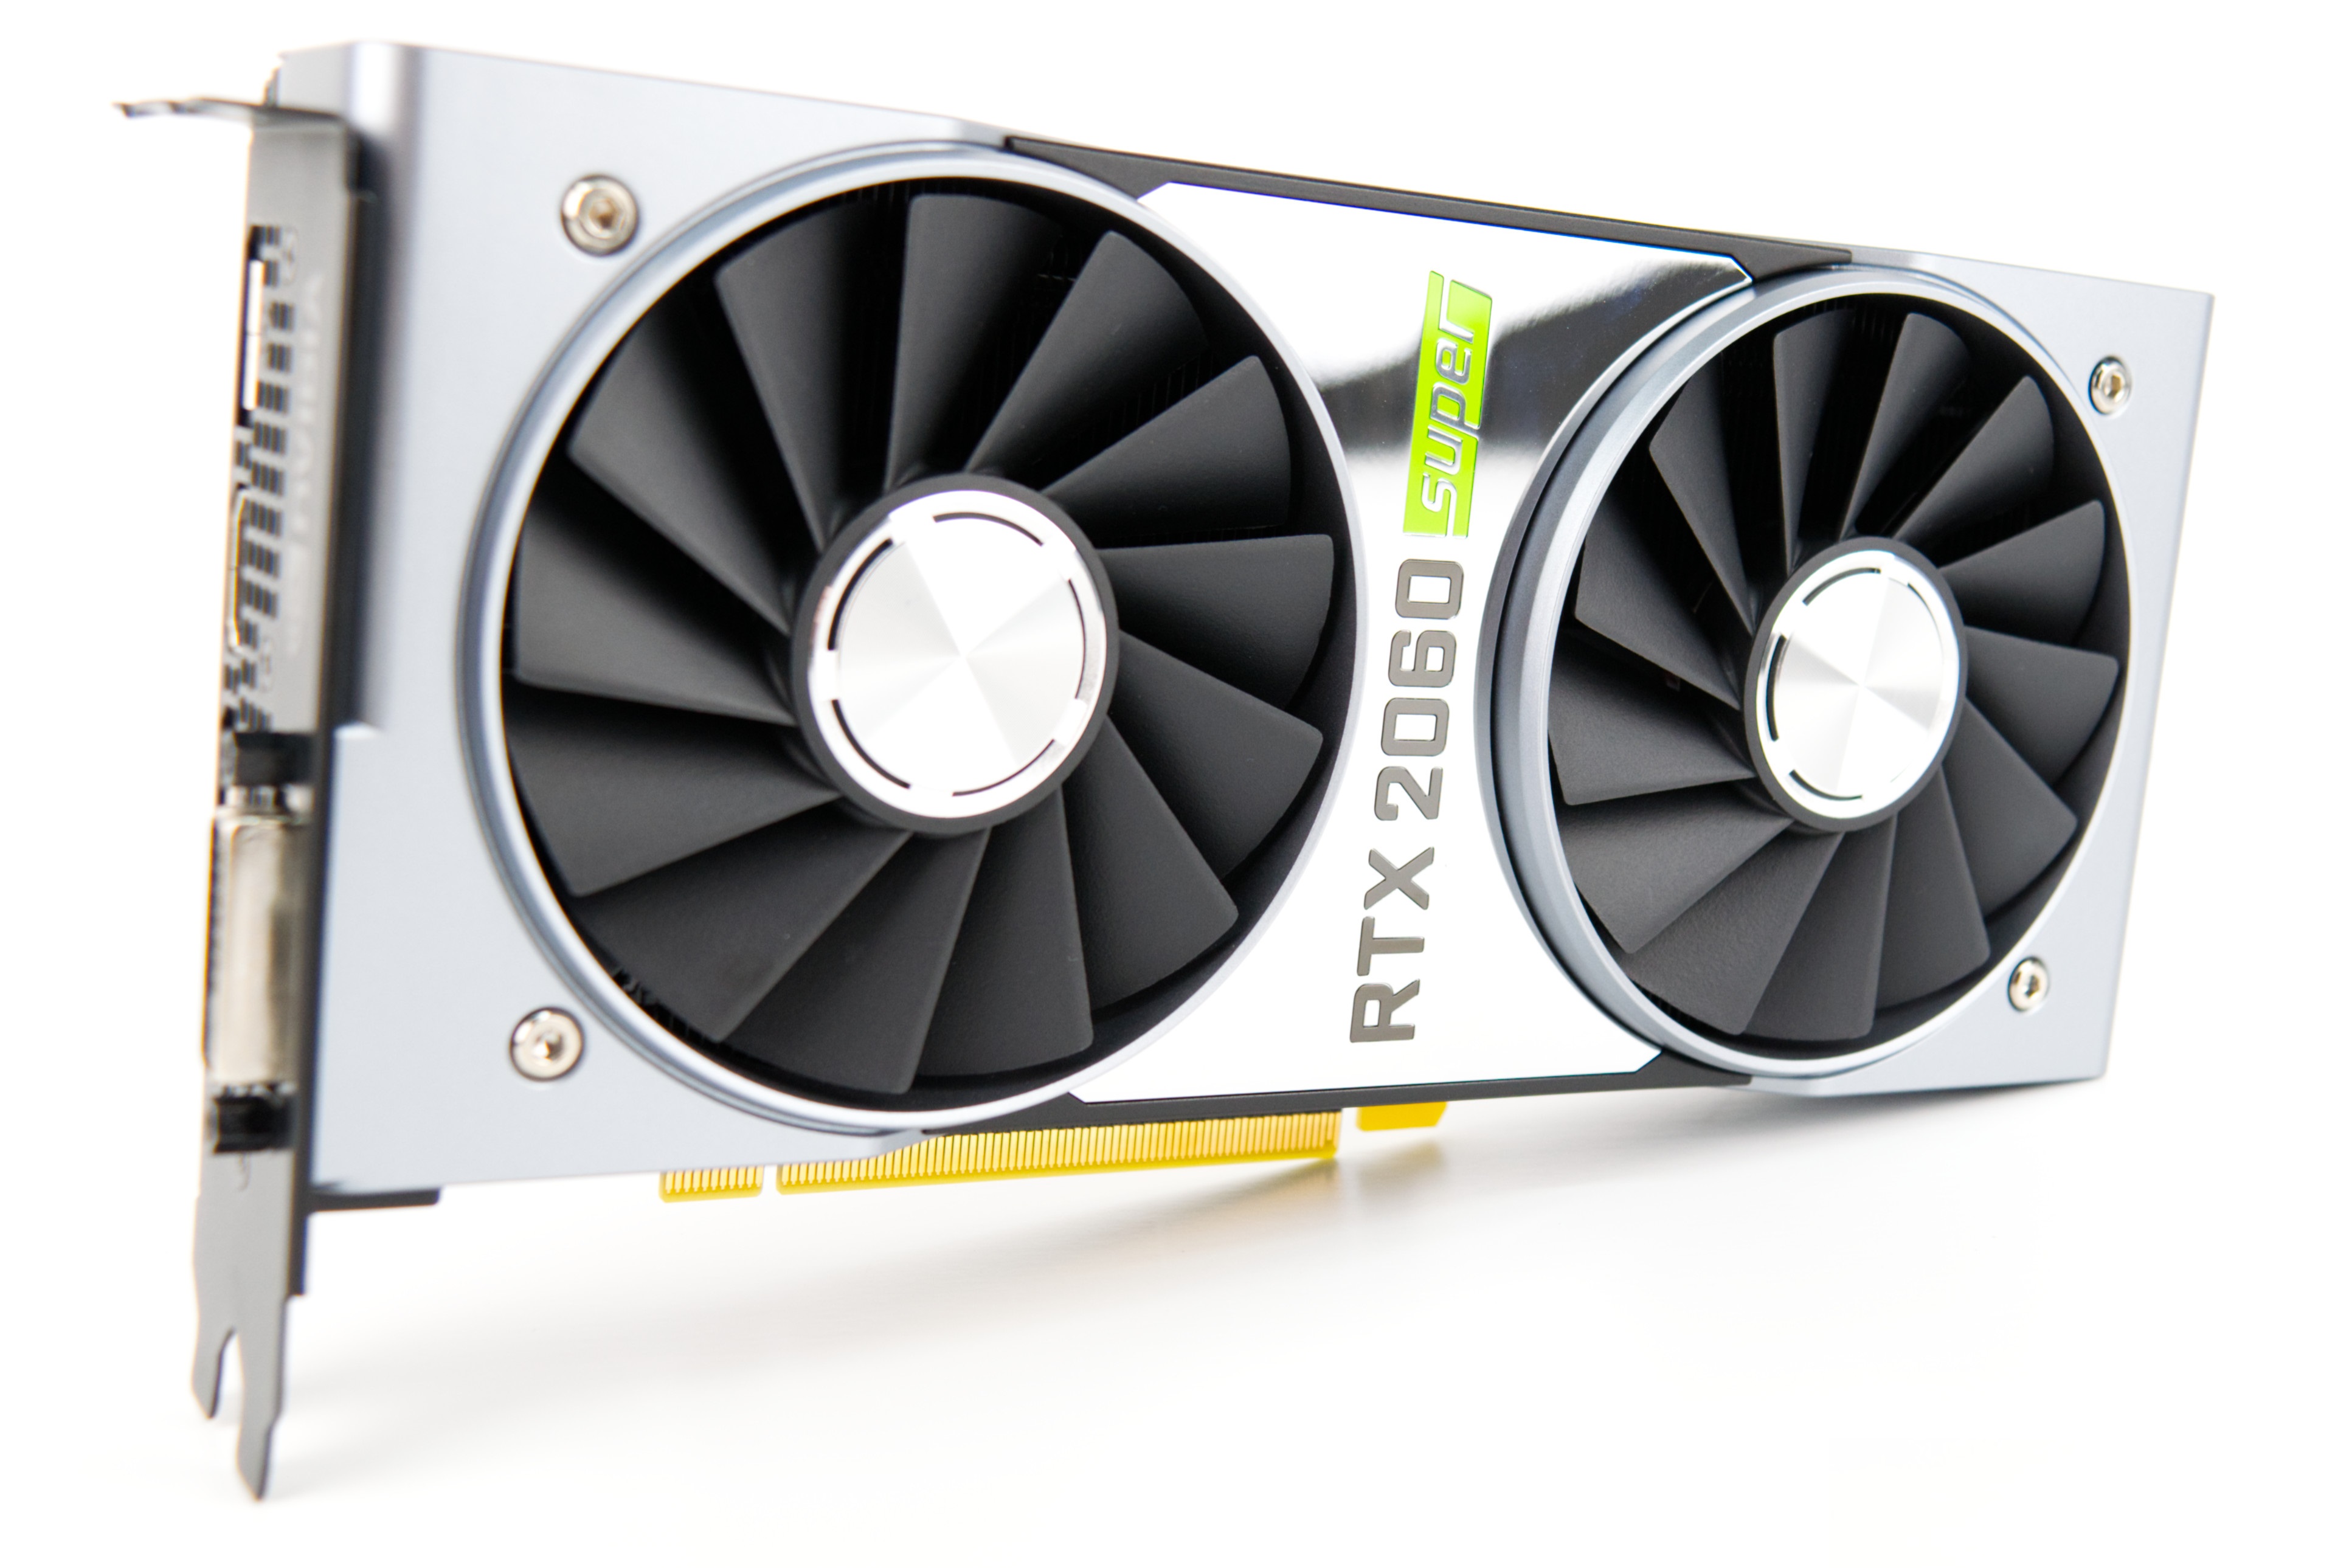 Nvidia GeForce RTX 2060 Review: The entry-level GPU comes with GB of VRAM - NotebookCheck.net Reviews